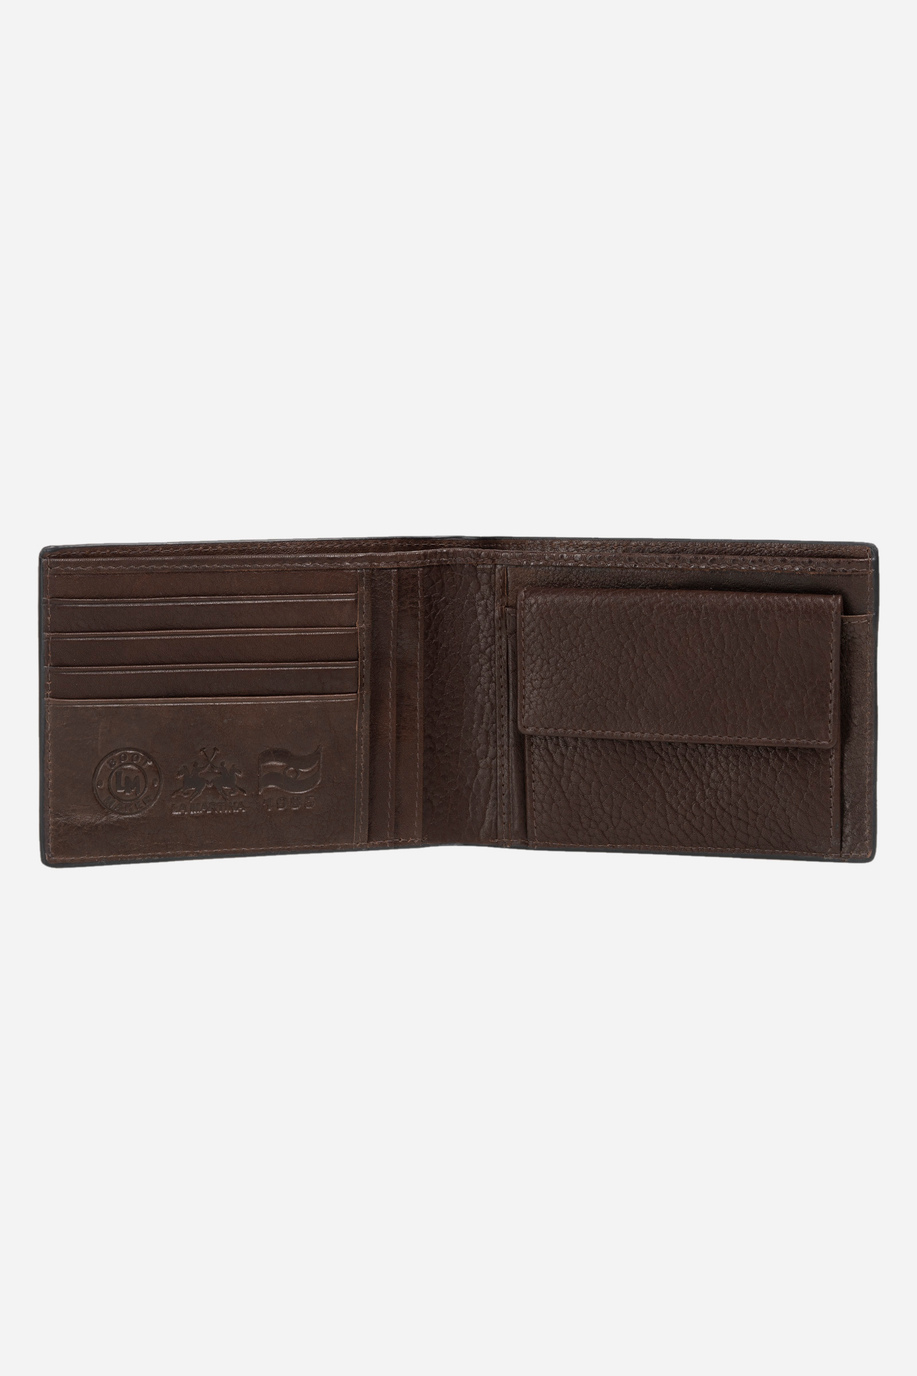 Leather wallet - Paulo - Wallets and key chains | La Martina - Official Online Shop